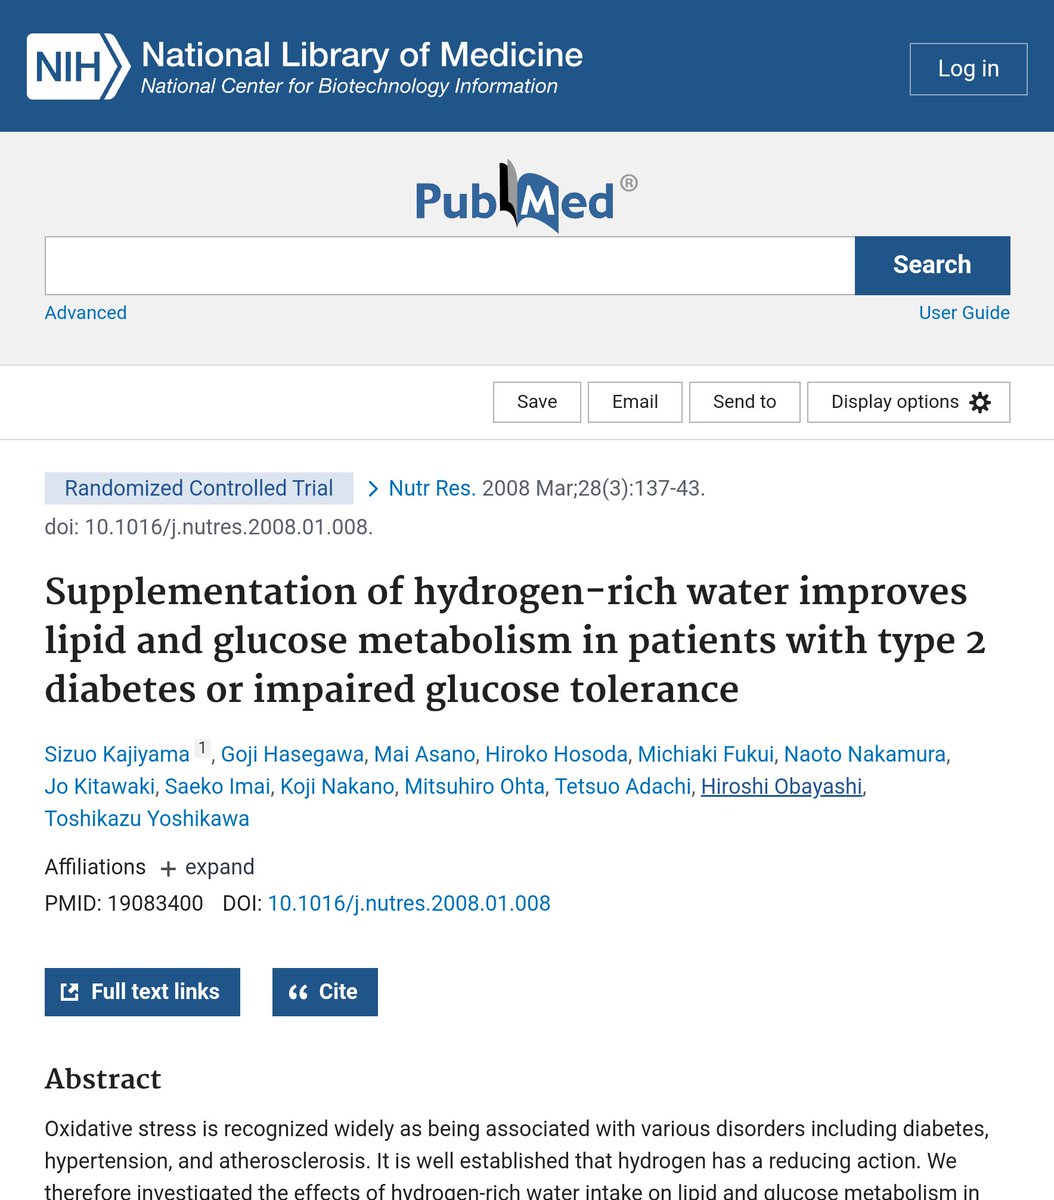 Supplementation of Hydrogen-Rich #water improves #lipid & glucose #metabolism in patients with type 2 #diabetes or impaired #glucose tolerance. 💦 It is well established that #H2 has a reducing action pubmed.ncbi.nlm.nih.gov/19083400 #HydrogenWater #LongCovid #lockdin $ltnc